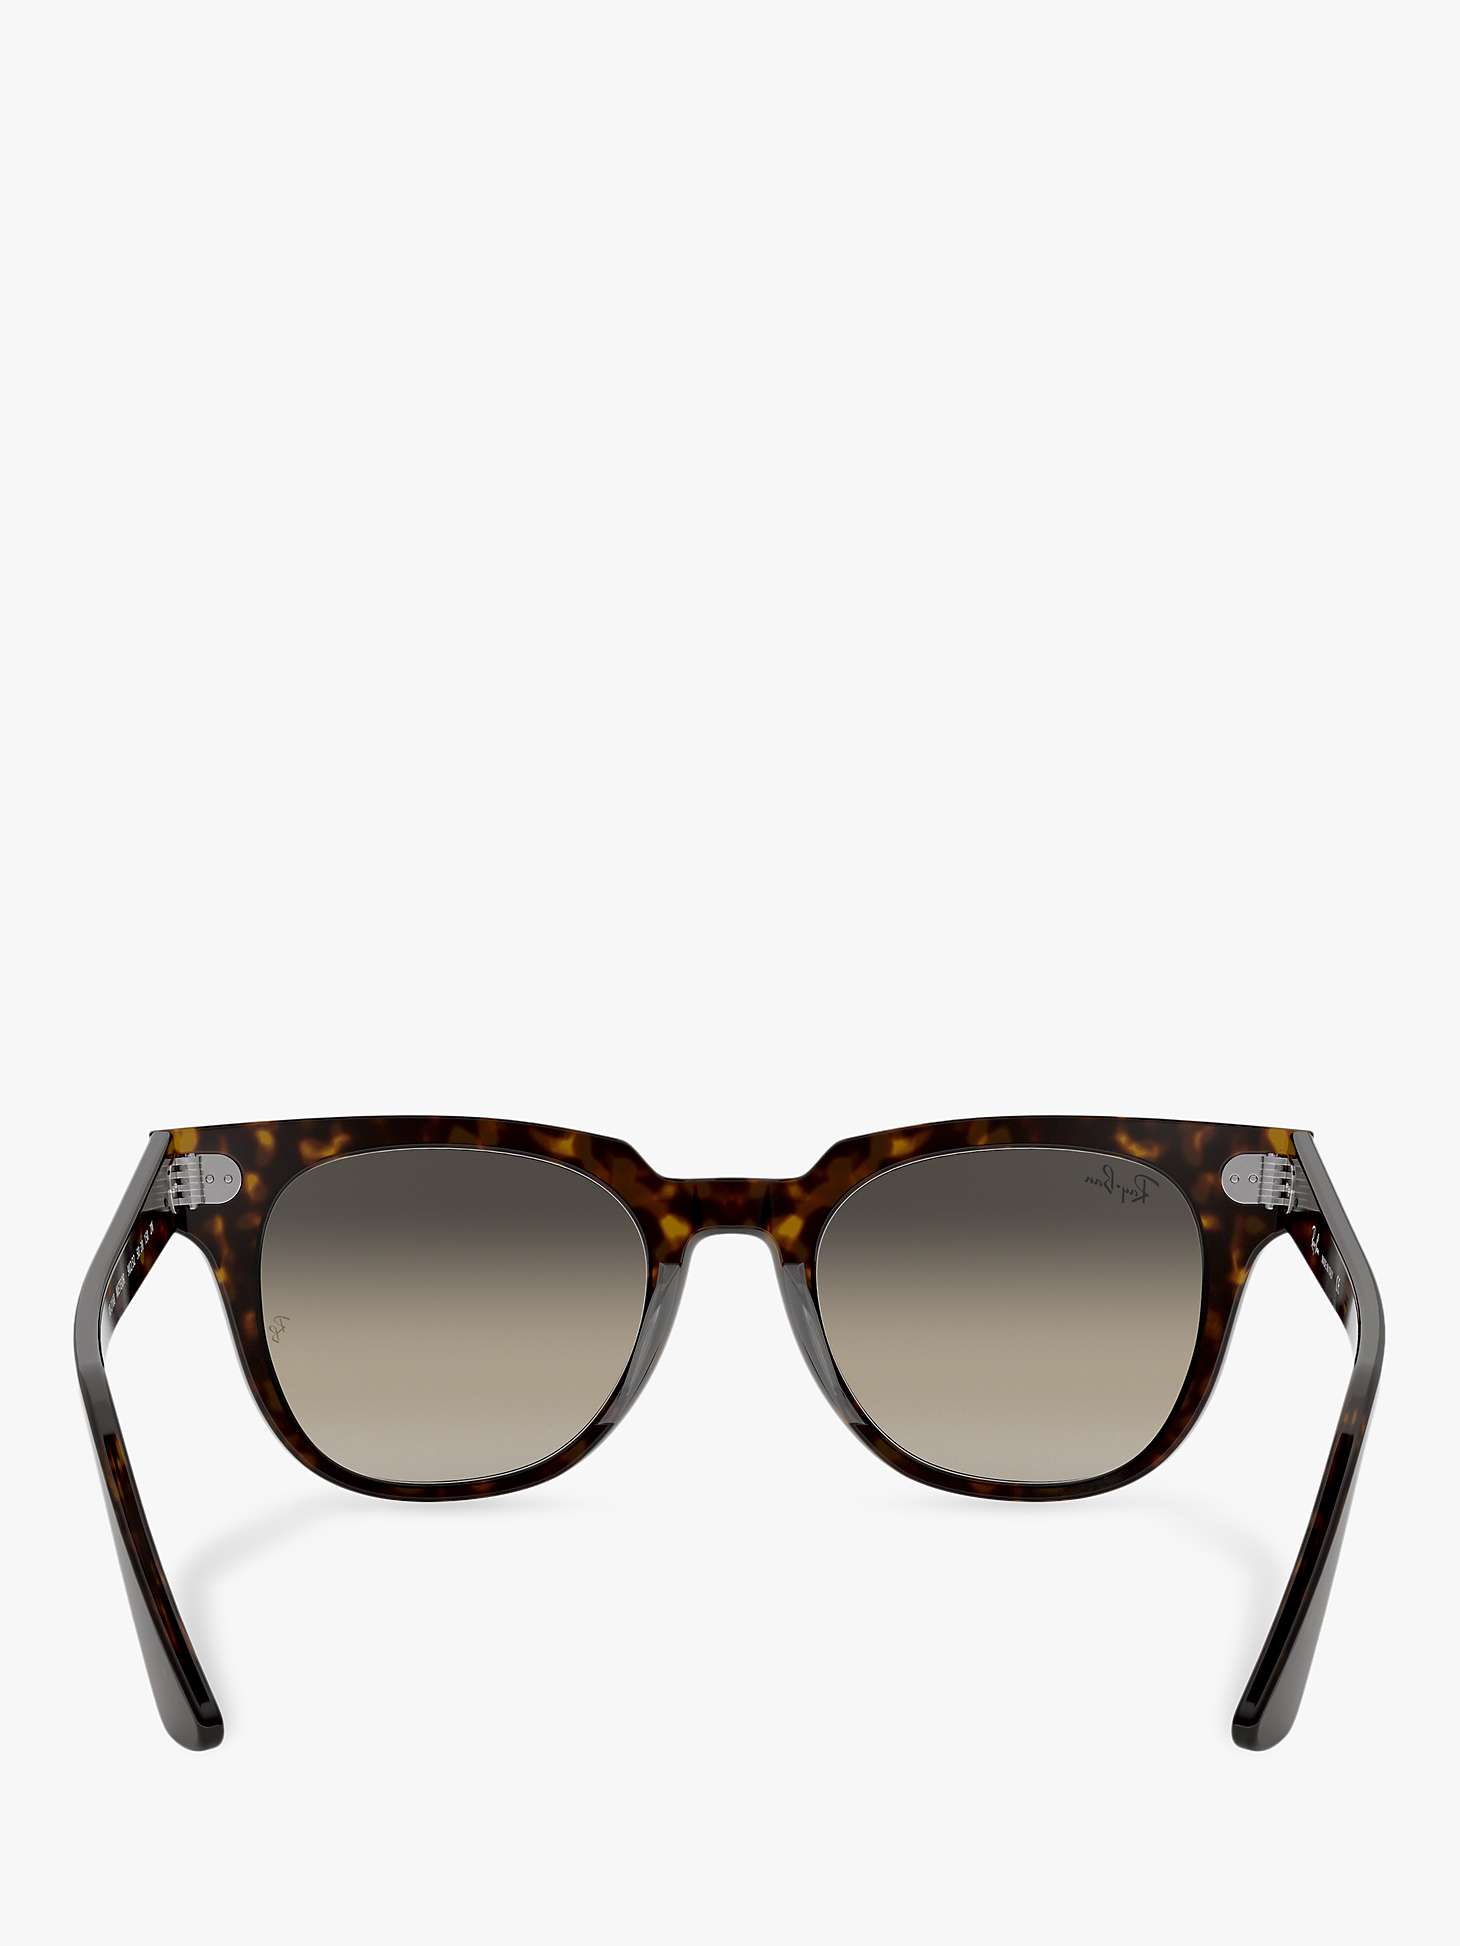 Buy Ray-Ban RB2168 Unisex Square Sunglasses Online at johnlewis.com